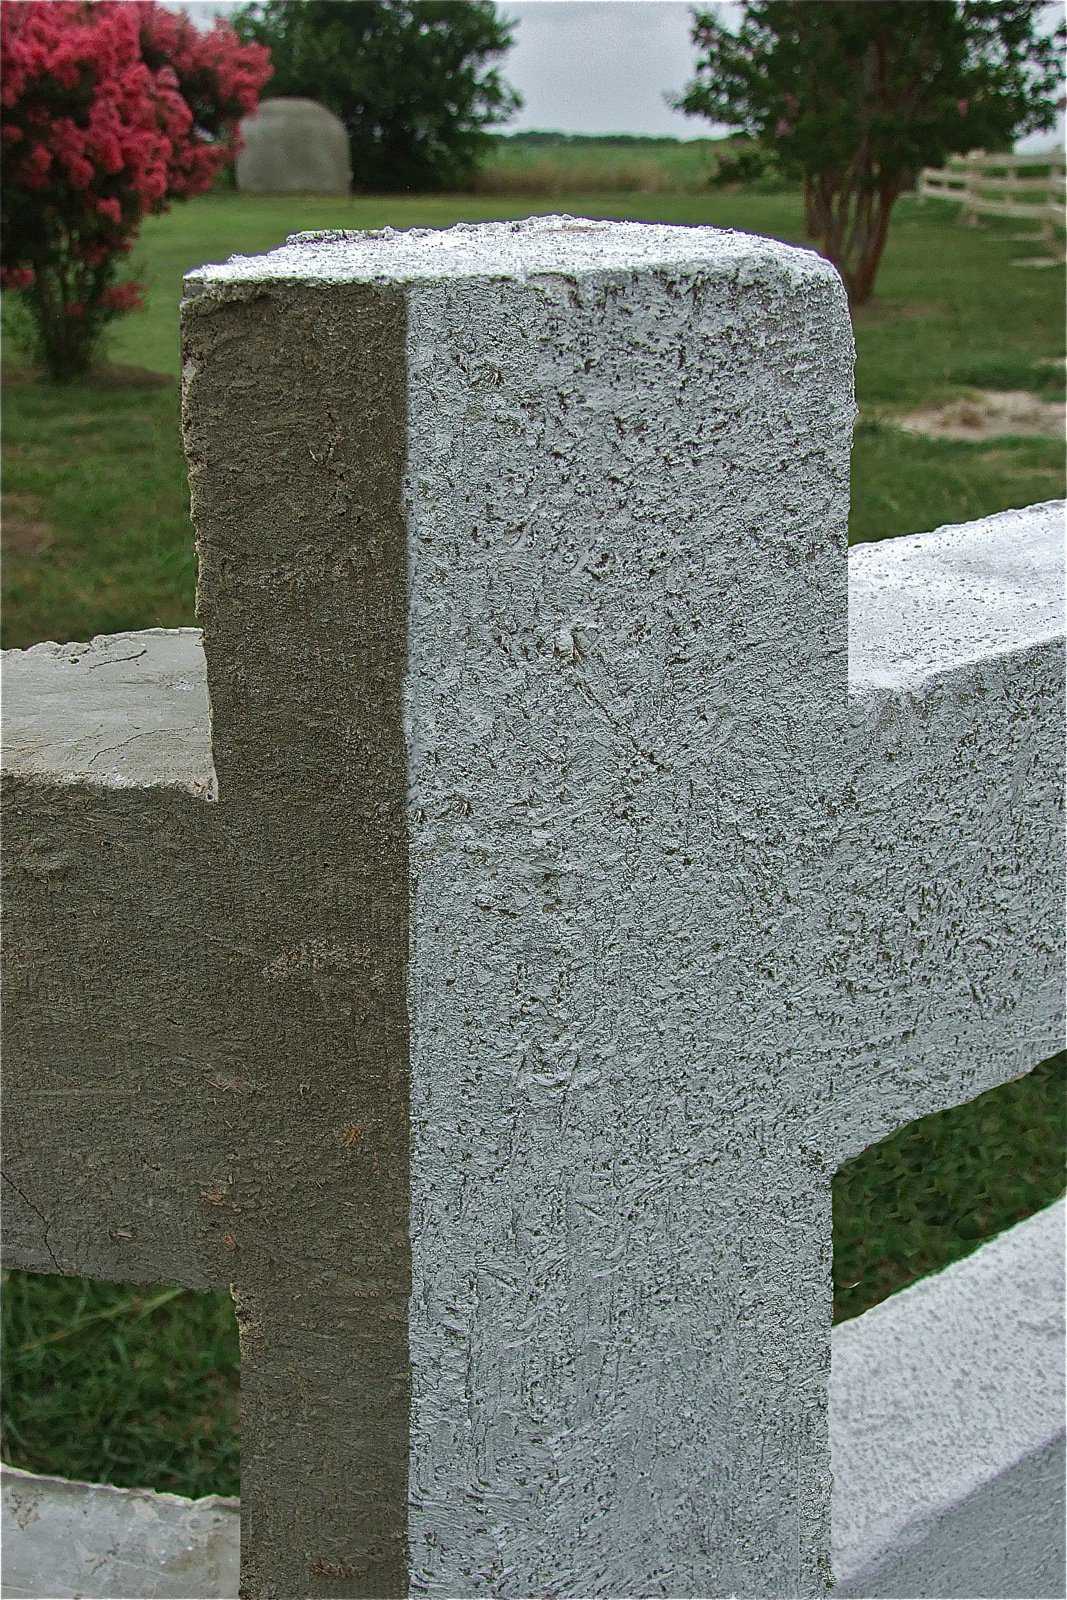 A closer look of a corner post shows different textures that can be achieved while constructing the fence. Plus, a side-by-side comparison of shows the original sandy-white colorant added to the concrete mix contrasted with a painted coat of white-wash on the right.